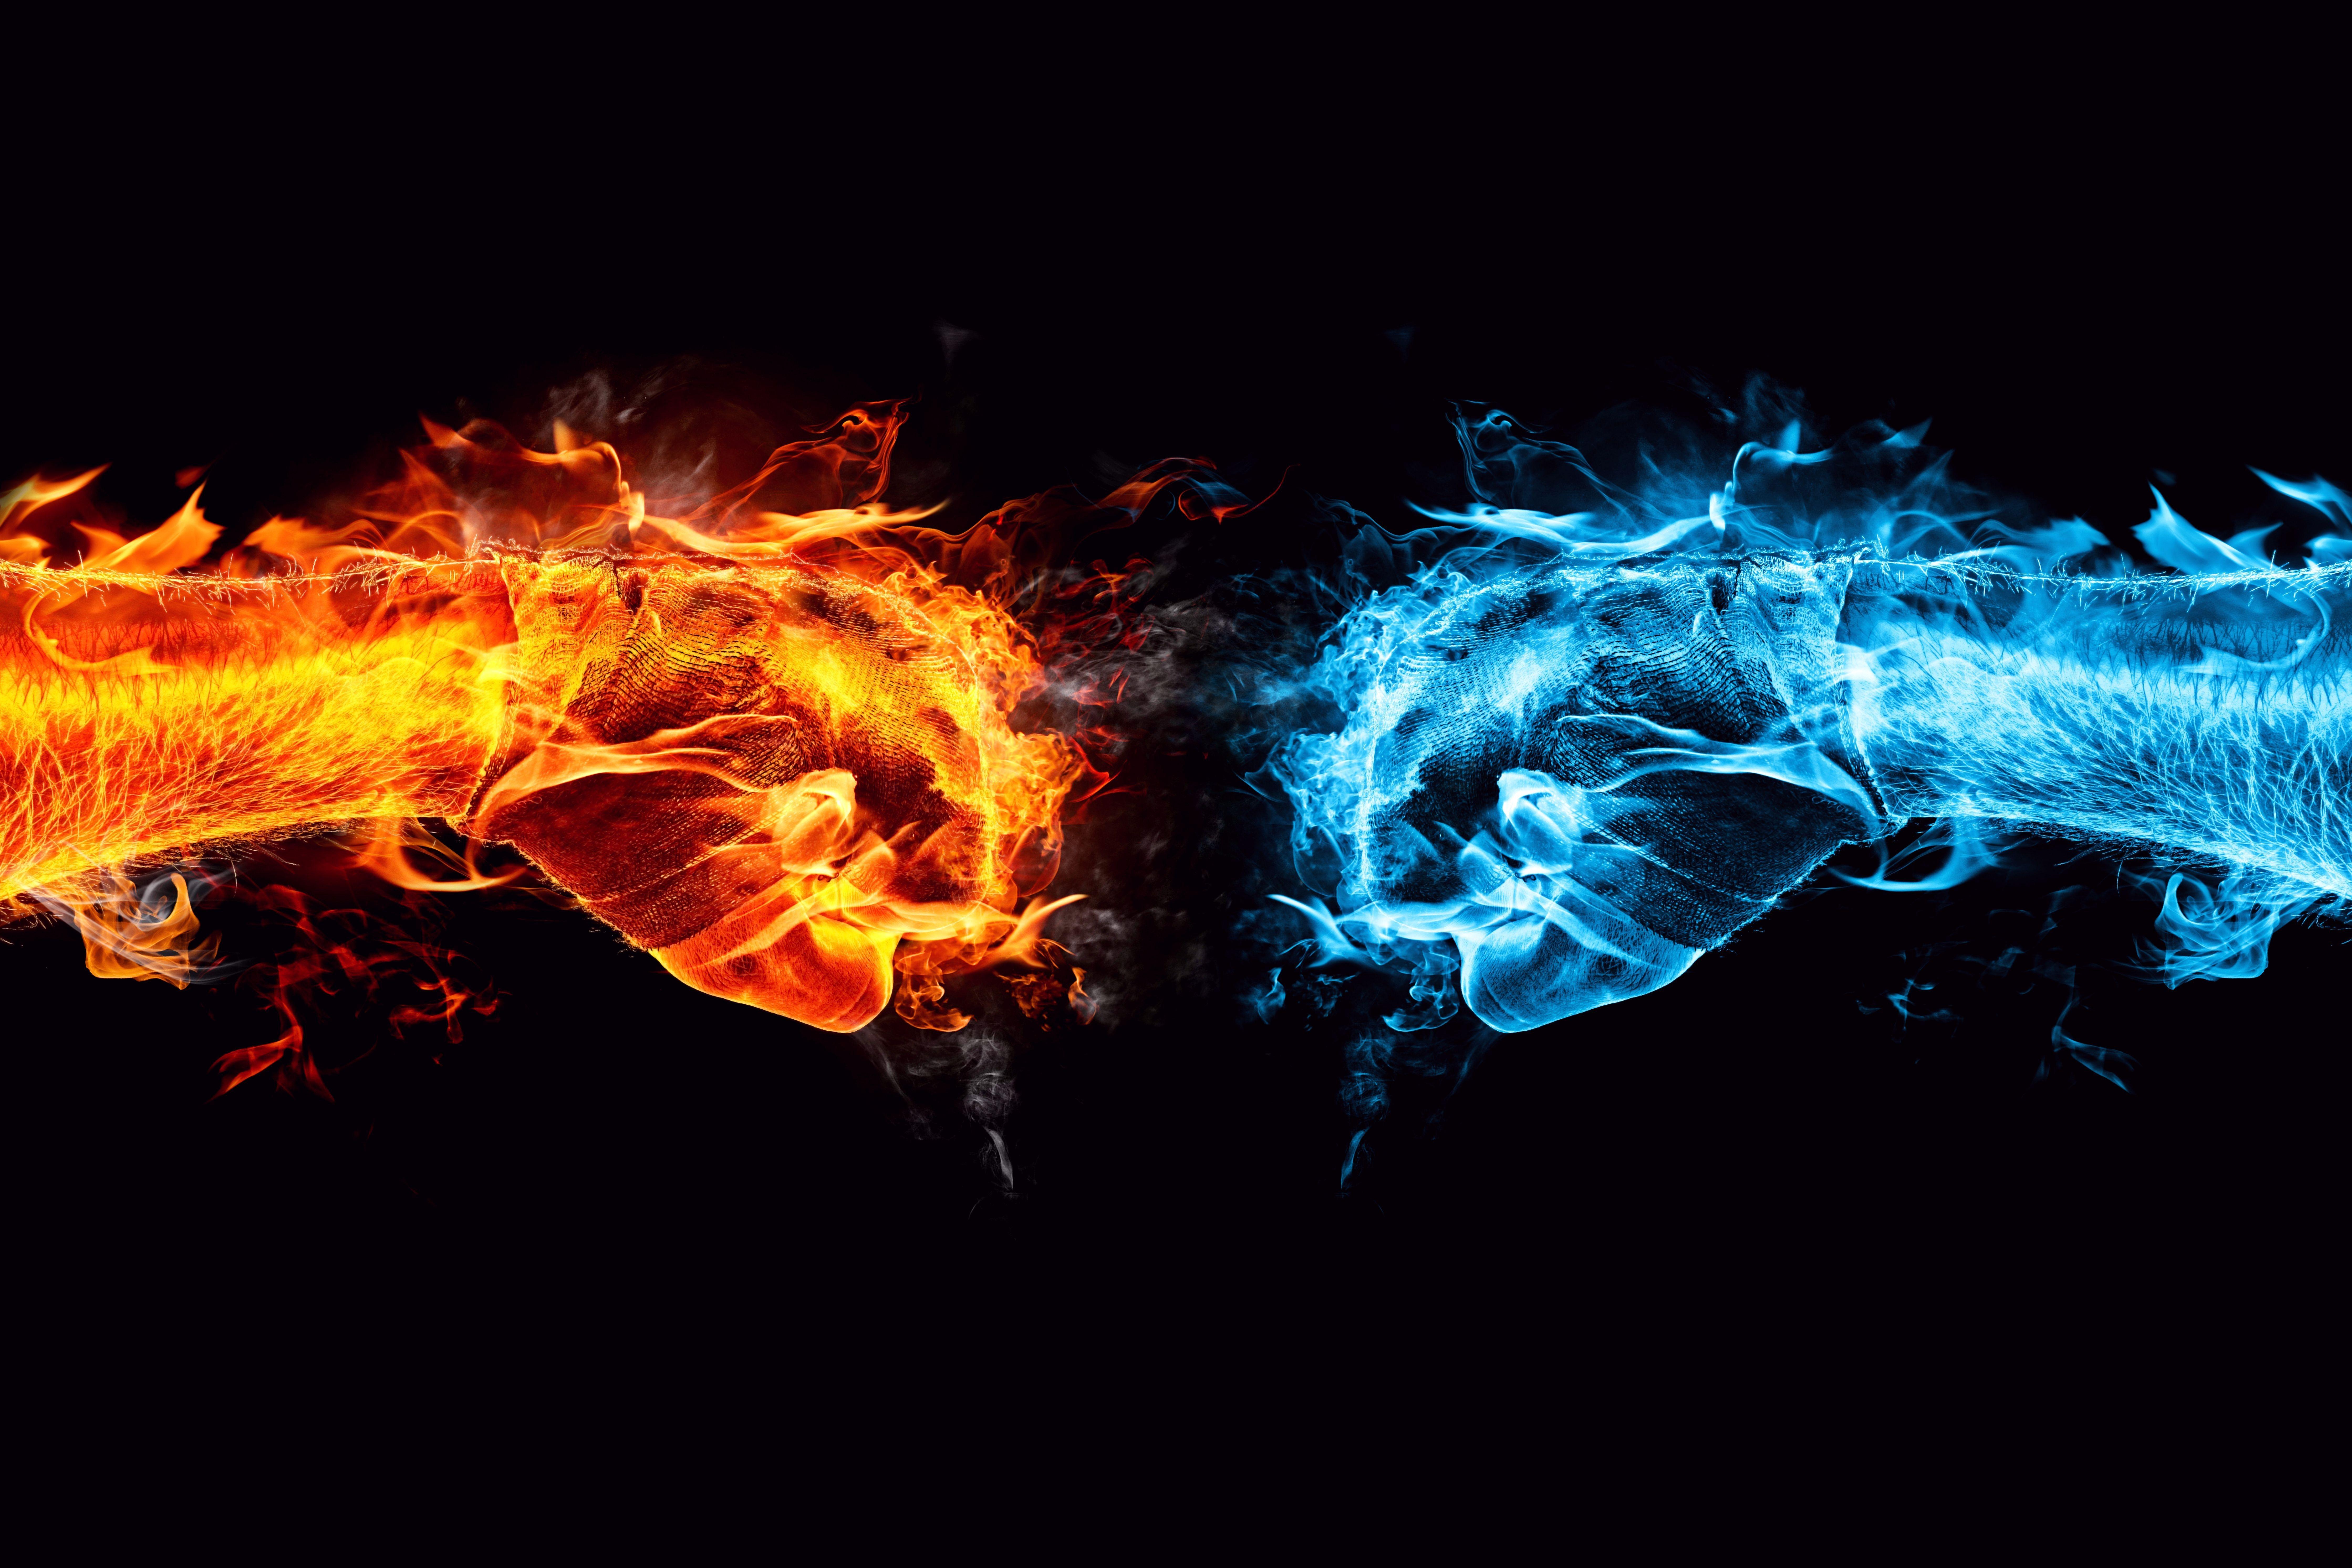 HD wallpaper, Organism, Heat, Visual Effects, Fire, Special Effects, Graphics, Ice, Night, Darkness, Fists, Digital Art, Smoke, Computer Wallpaper, Simple Background, Flame